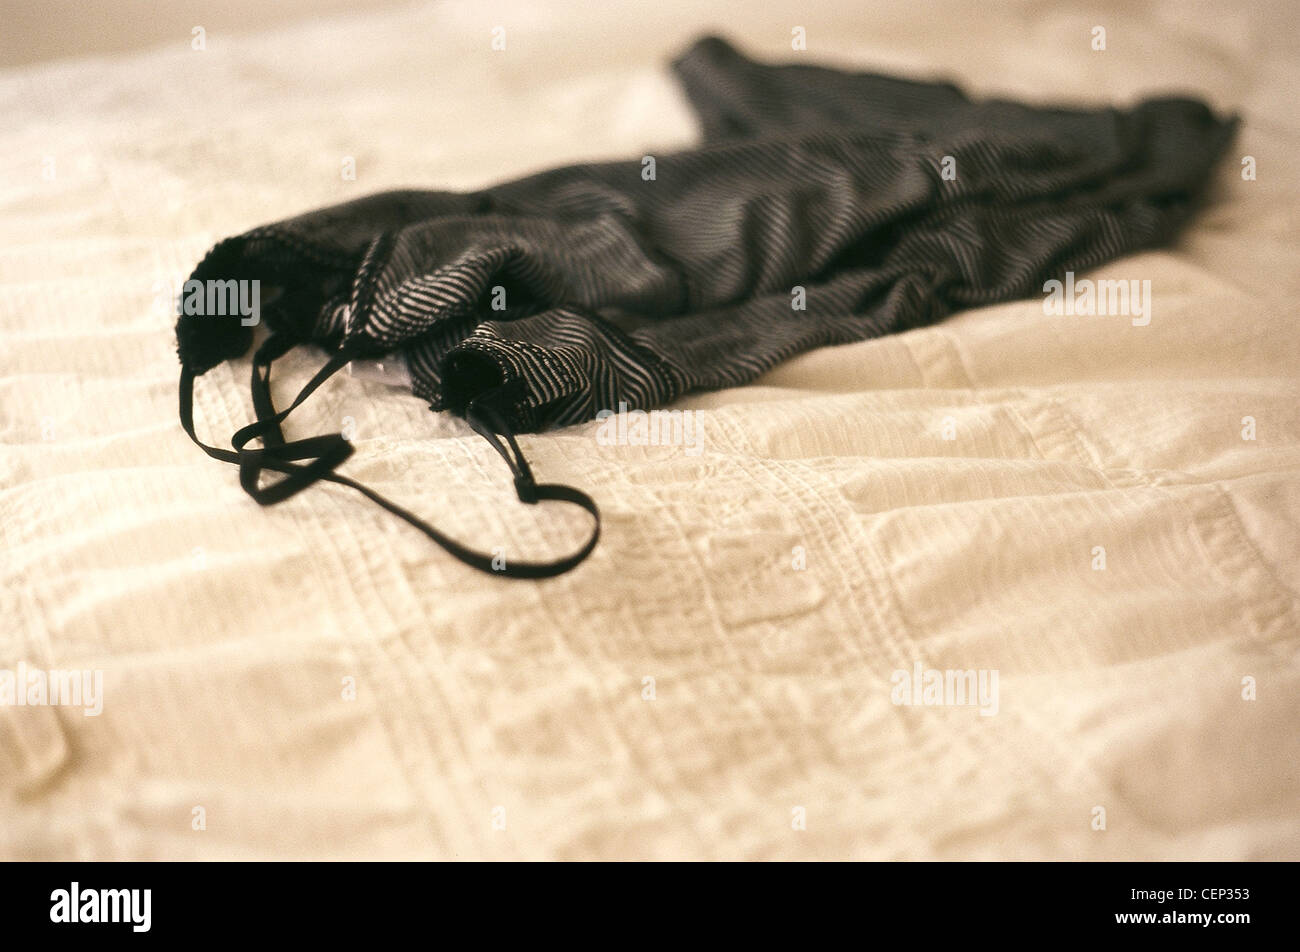 A black and white striped nightdress on a white textured bed spread Stock Photo